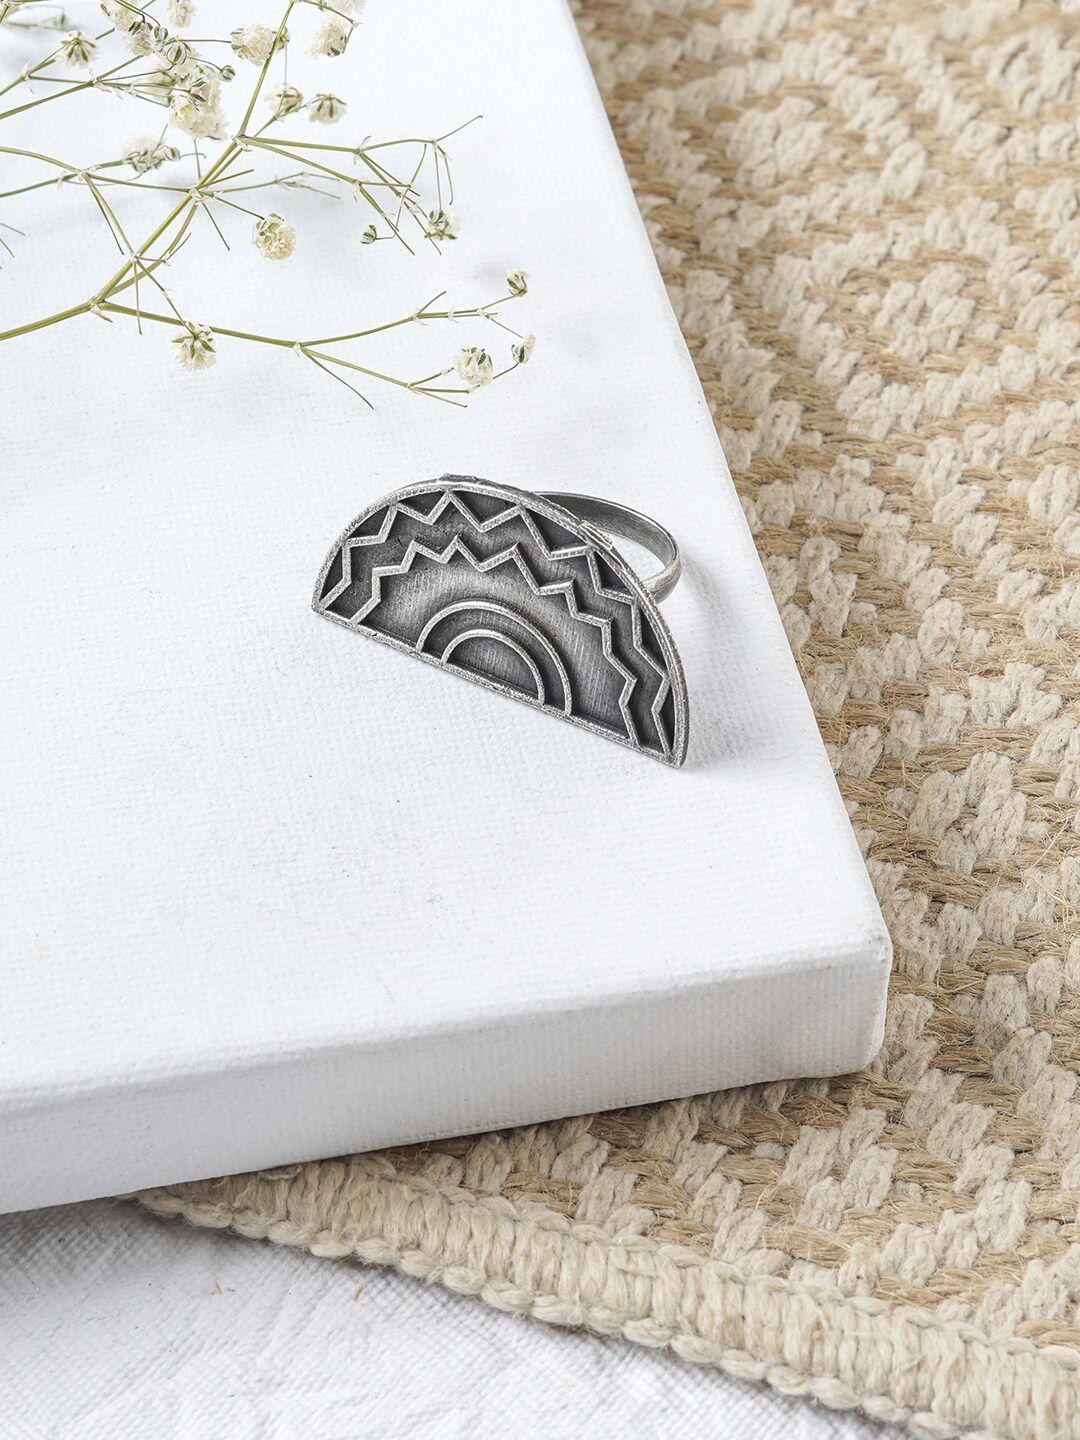 teejh oxidized silver-plated adjustable finger ring